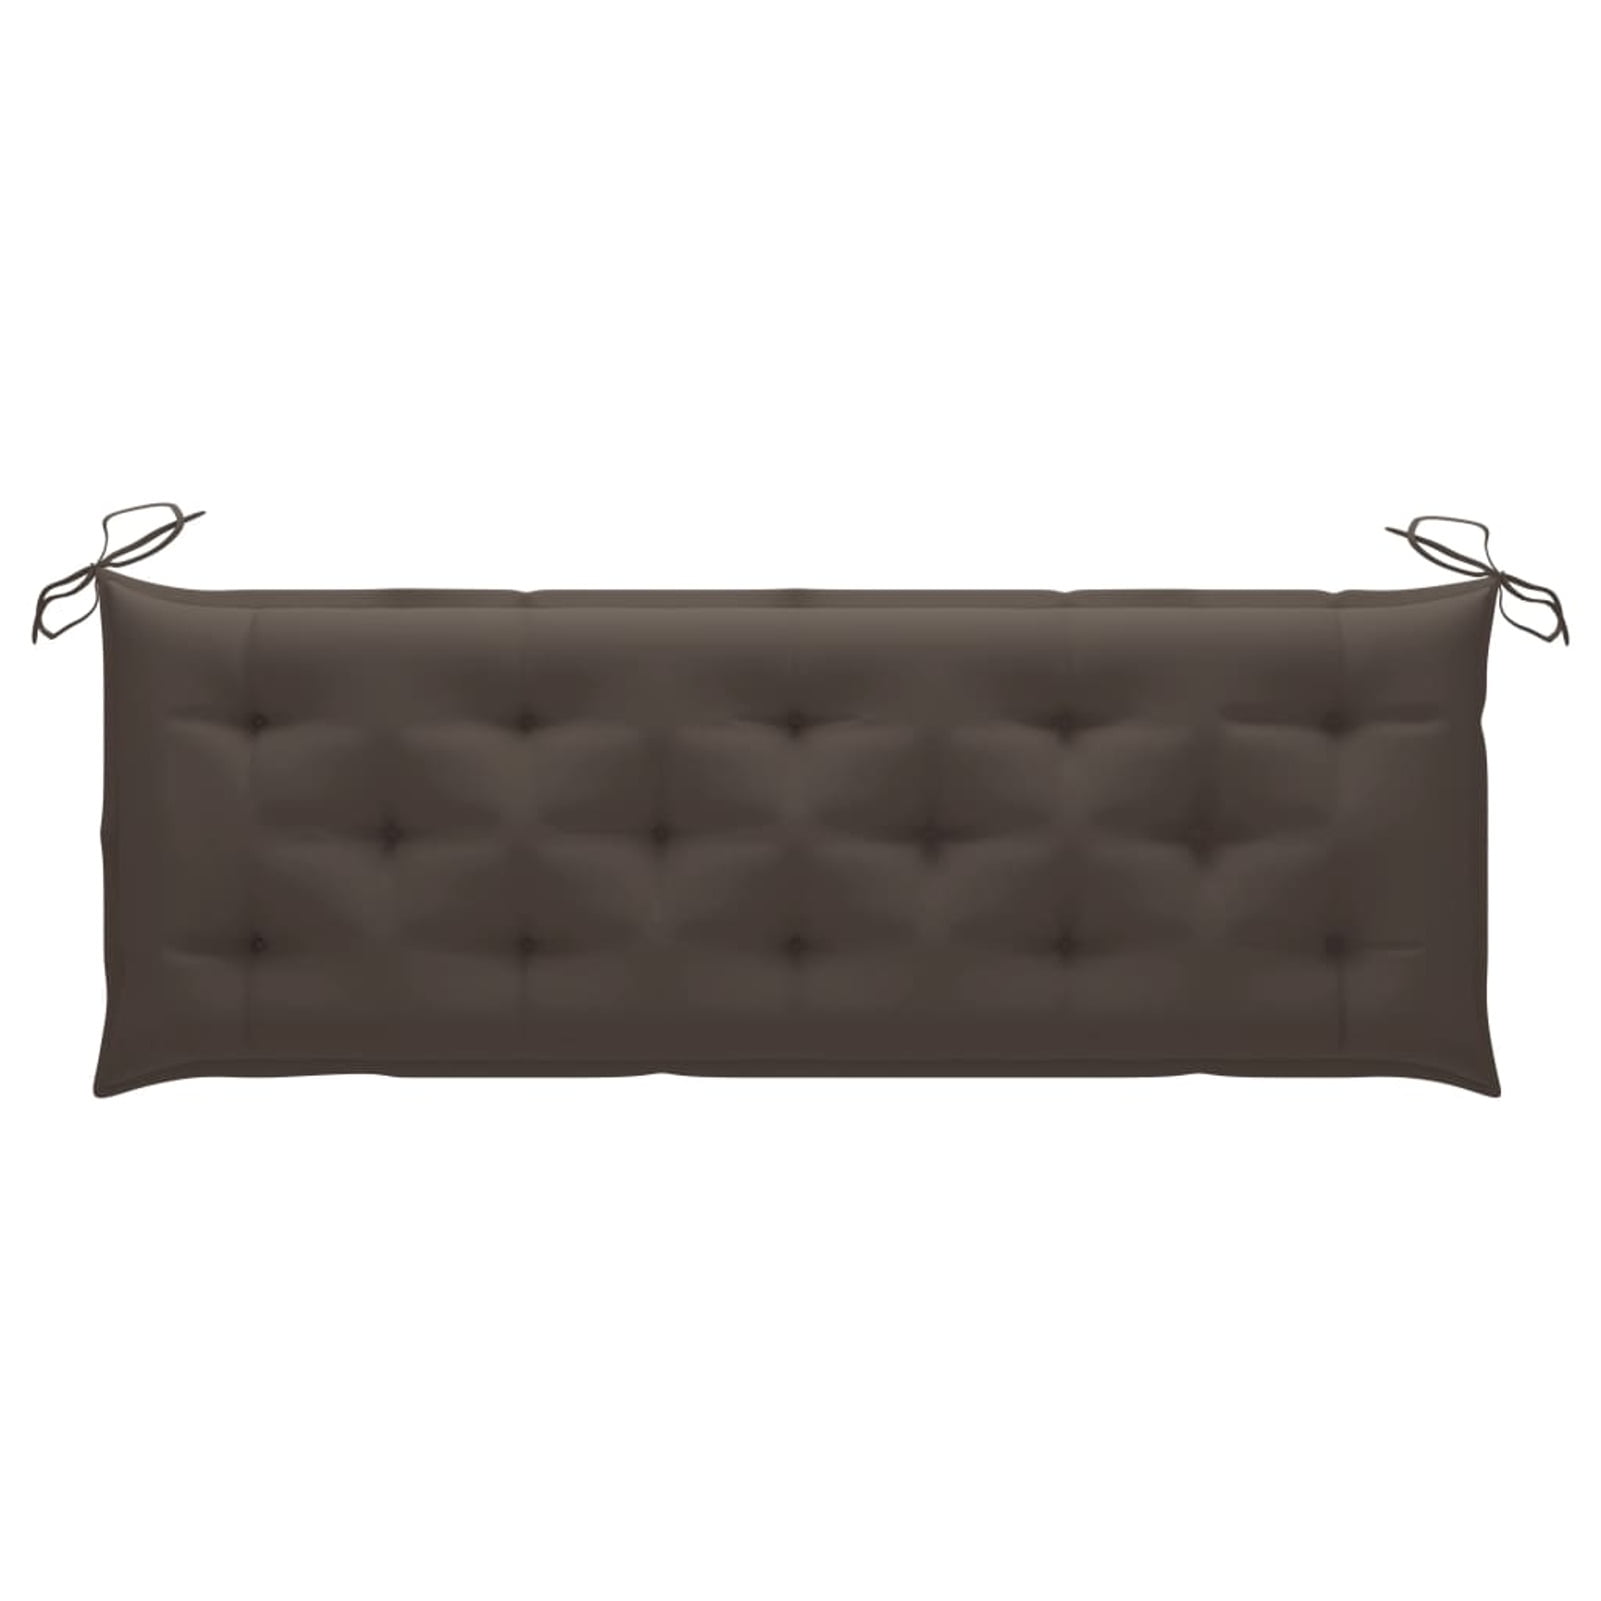 60-inch by 19-inch Micro Suede Bench Cushion - Red Wine